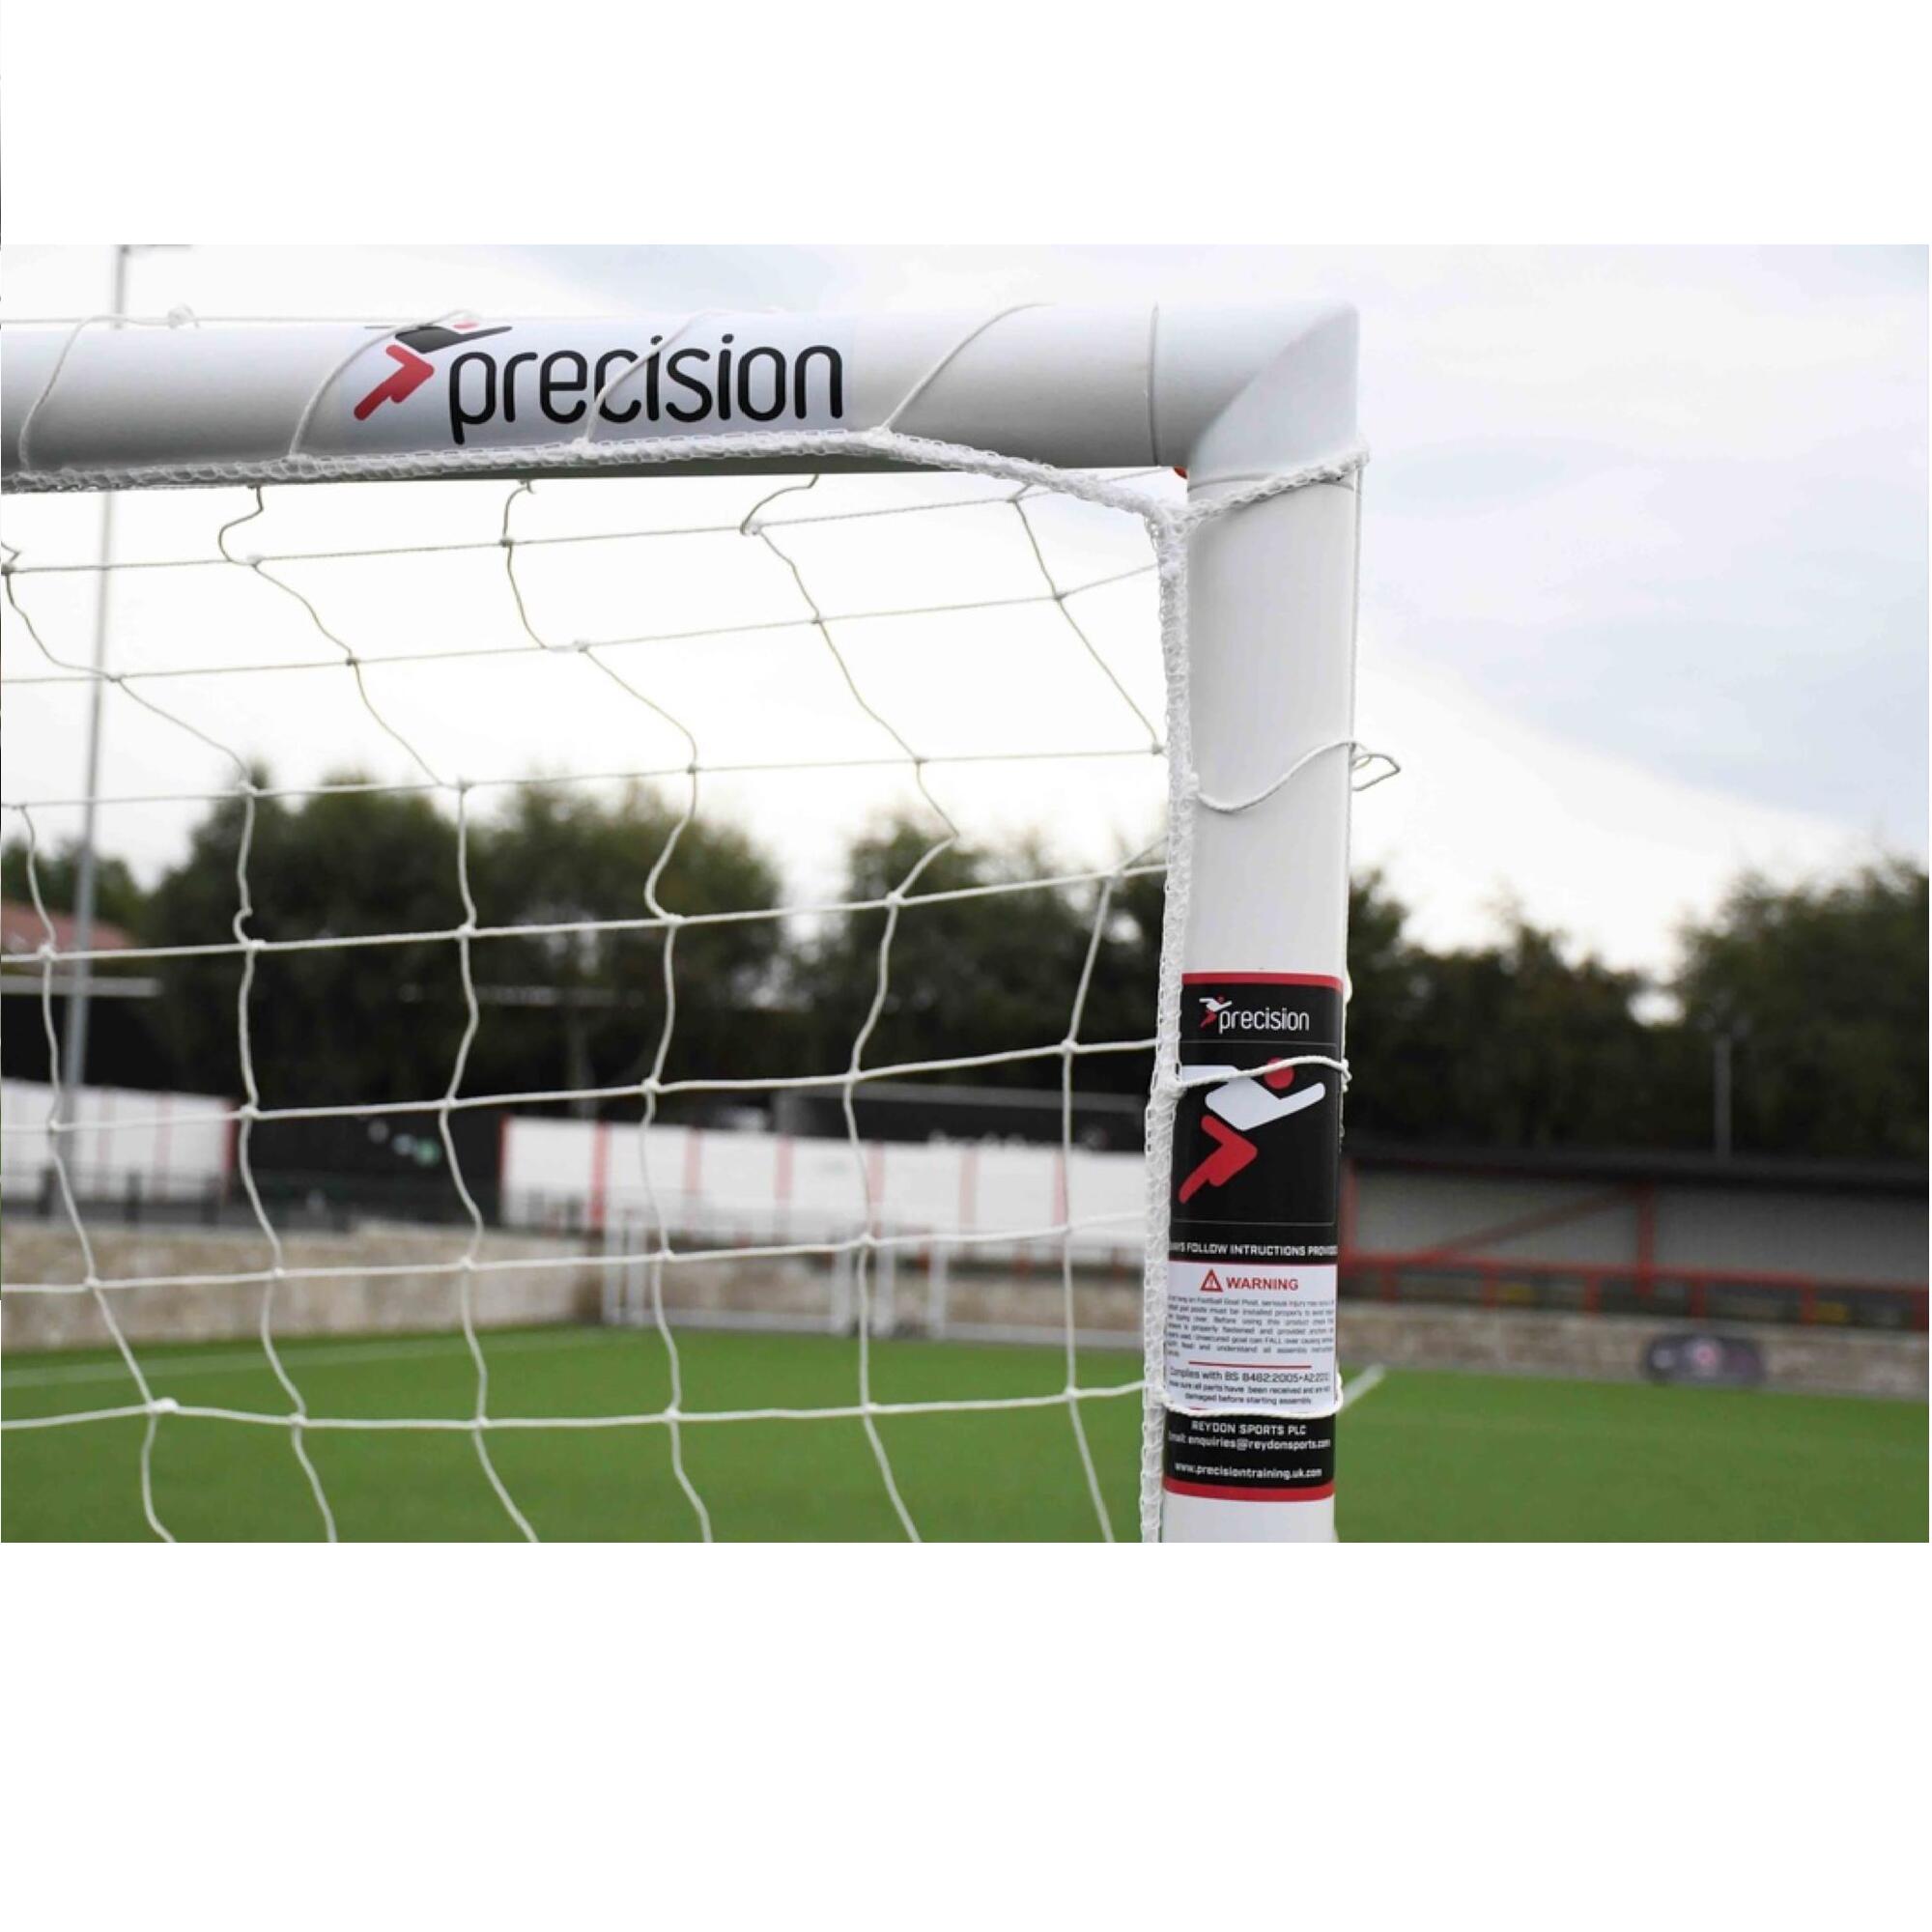 Precision Match Goal Posts 12' x 4' (BS 8462 approved) - White Colour 2/3